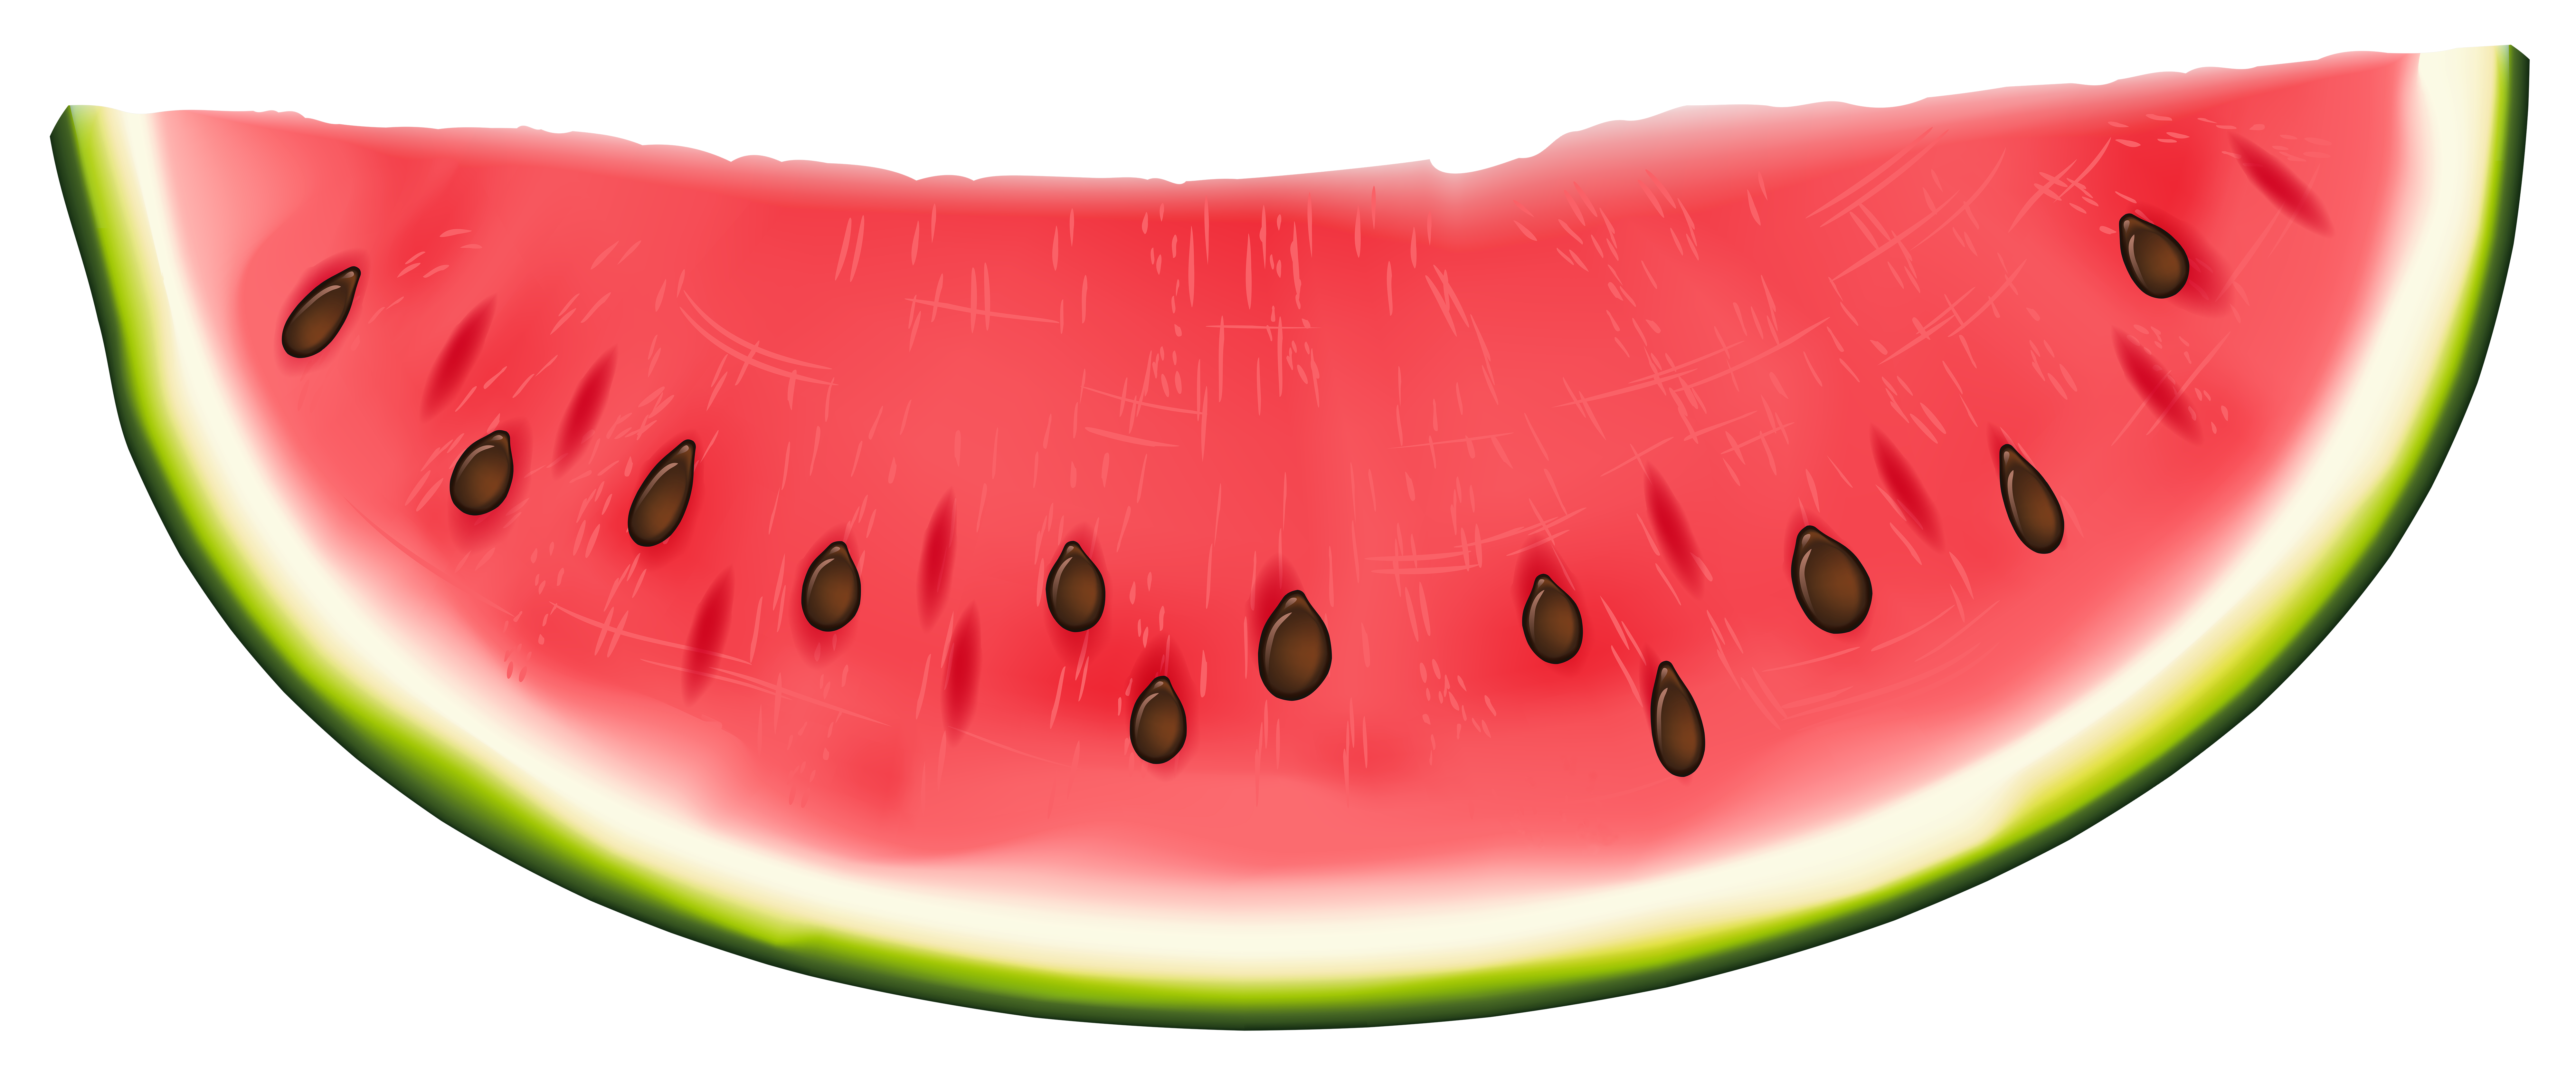 Watermelon Clipart for printable to